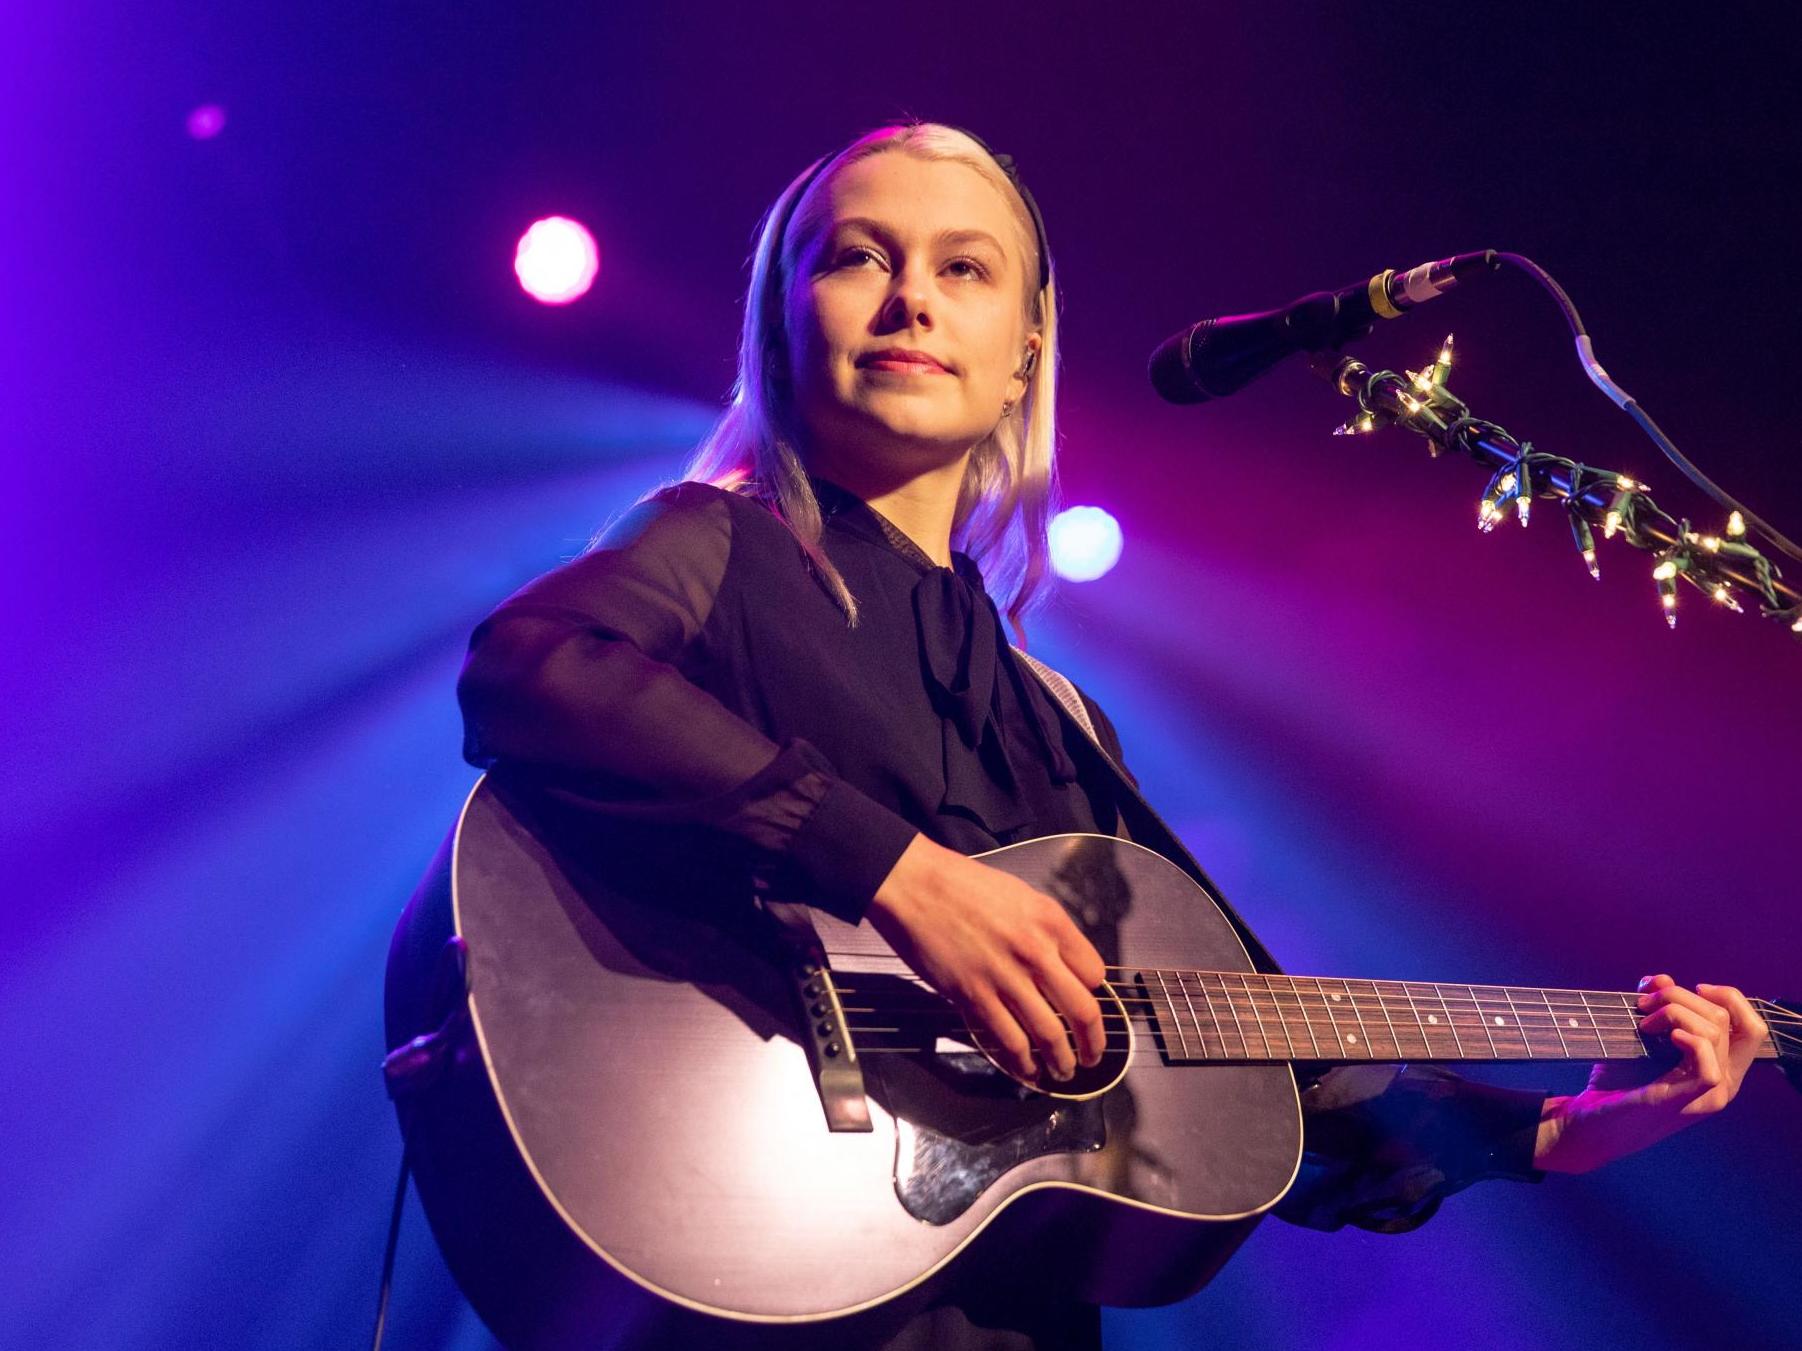 Phoebe Bridgers finds she can still connect with fans from home (